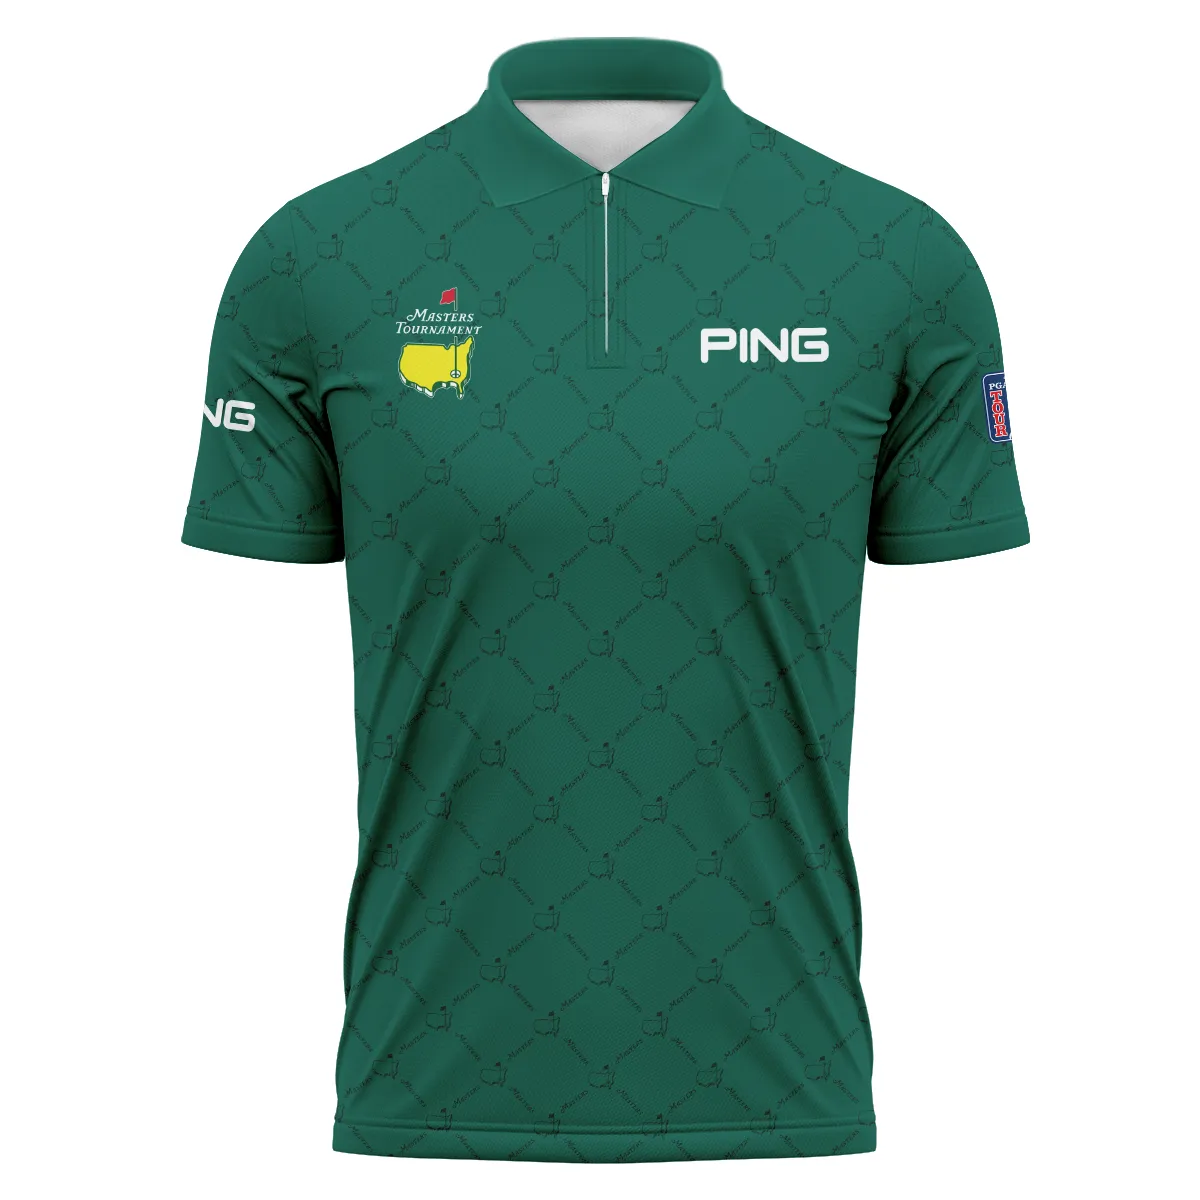 Golf Sport Pattern Color Green Mix Black Masters Tournament Ping Zipper Polo Shirt Style Classic